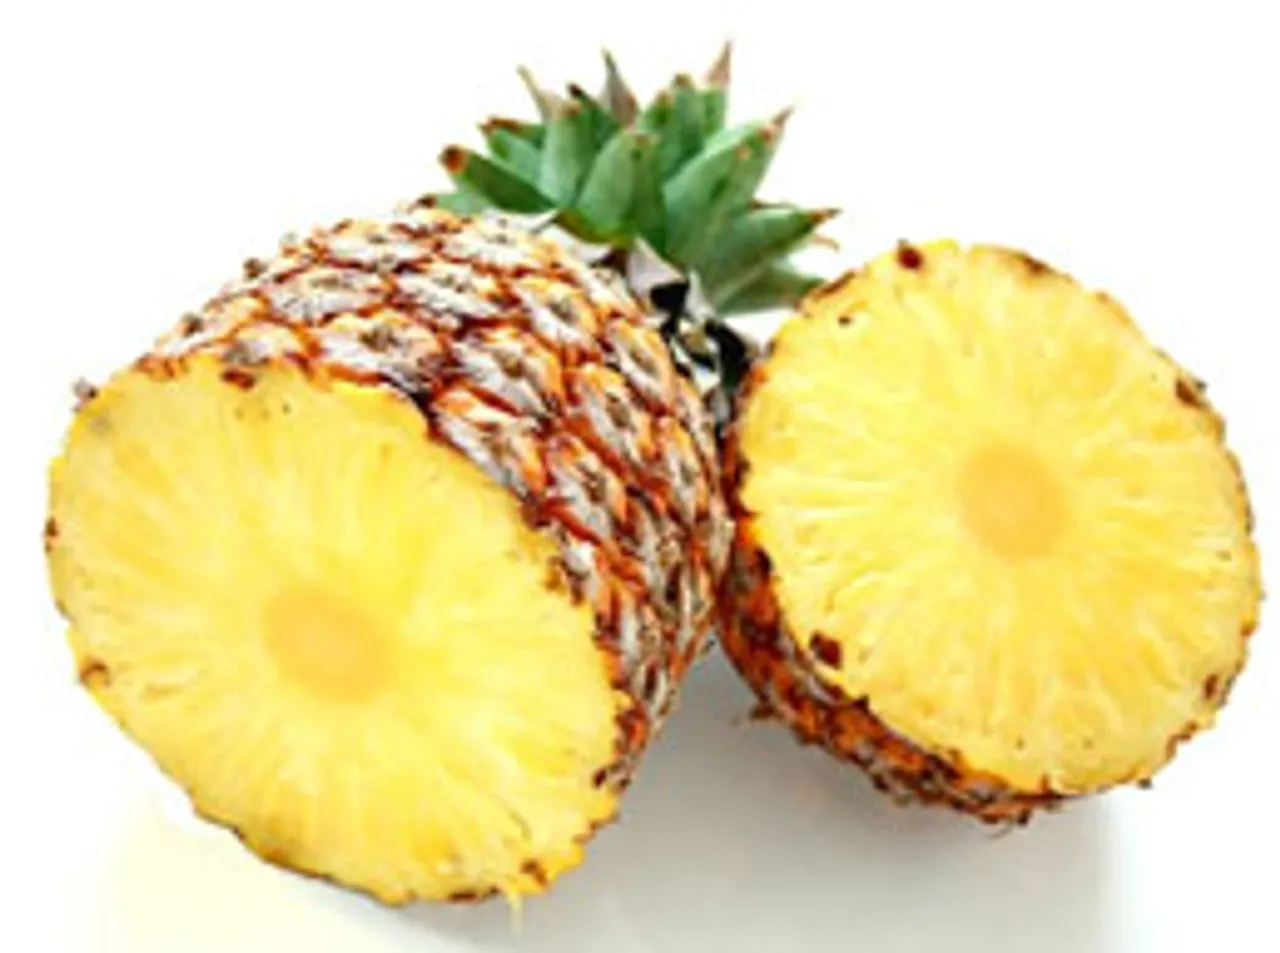 Pineapple Prickly sweet and full of flavour